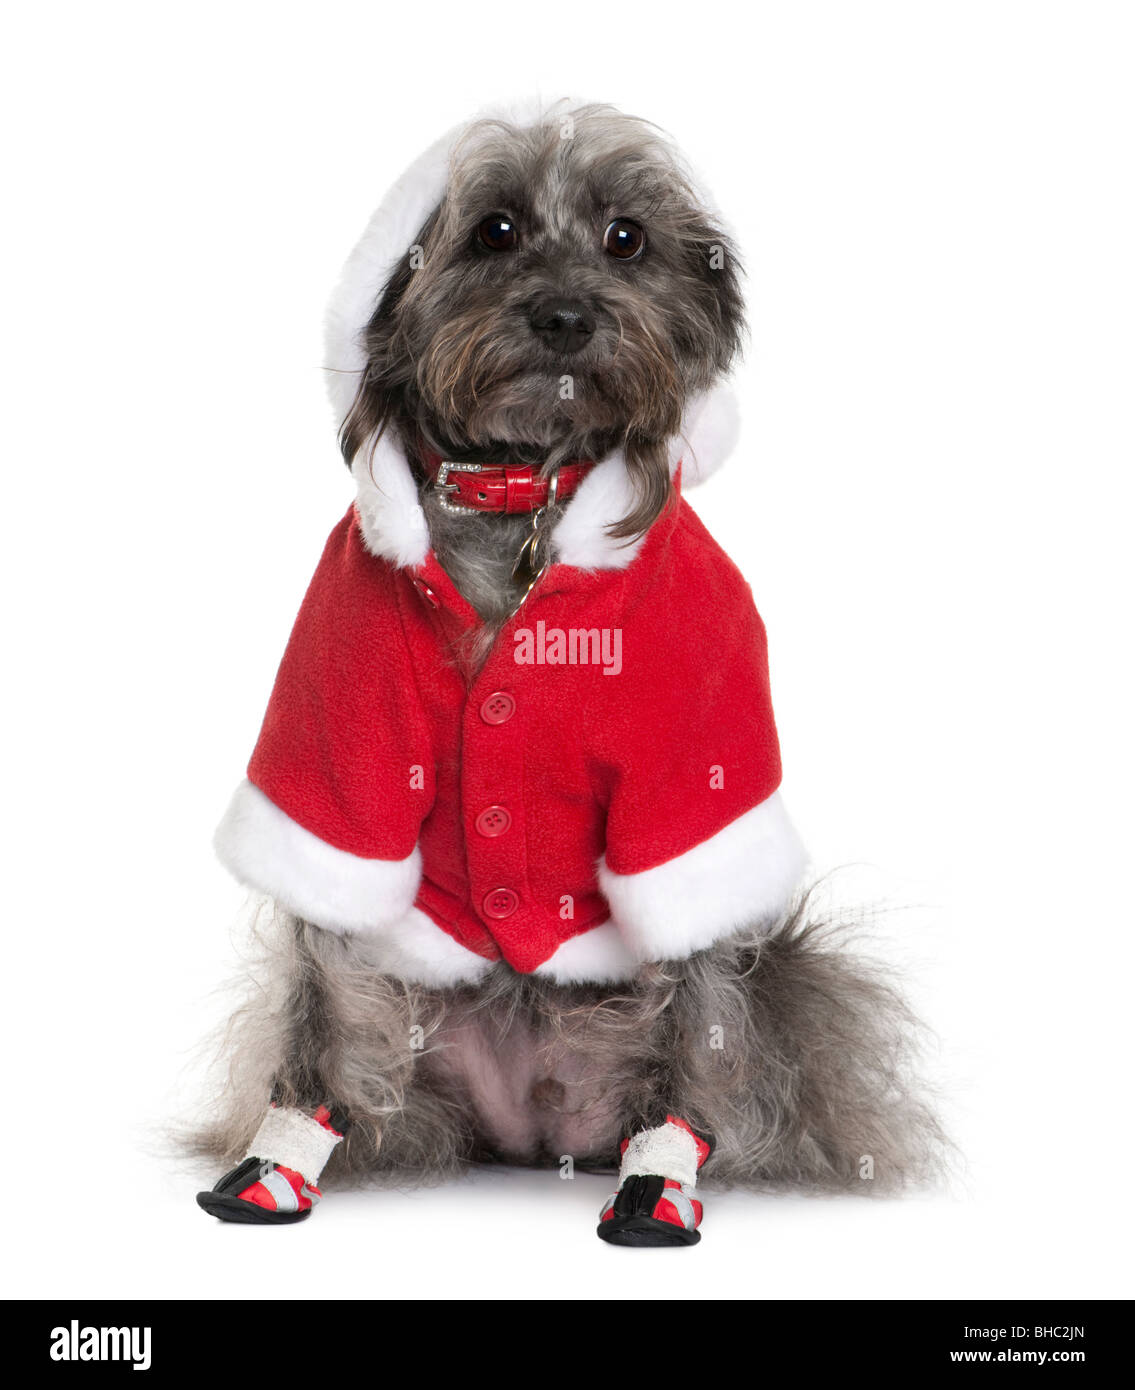 Cocktail D Amour Dog In Santa Outfit 4 Ans In Front Of White Background Photo Stock Alamy